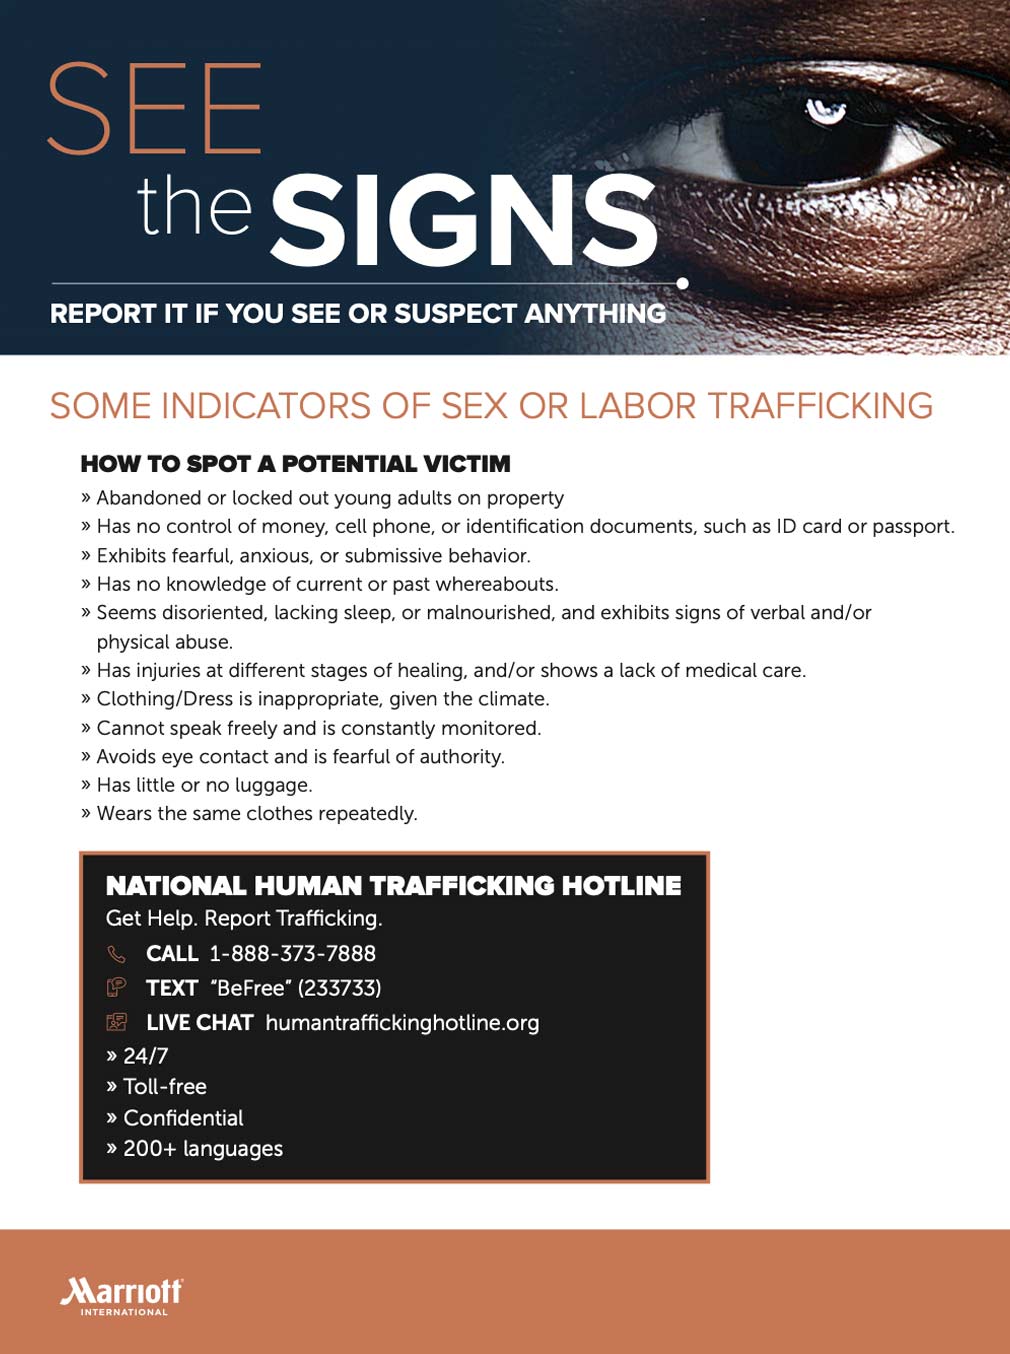 human trafficking: know the indicators, see the signs poster